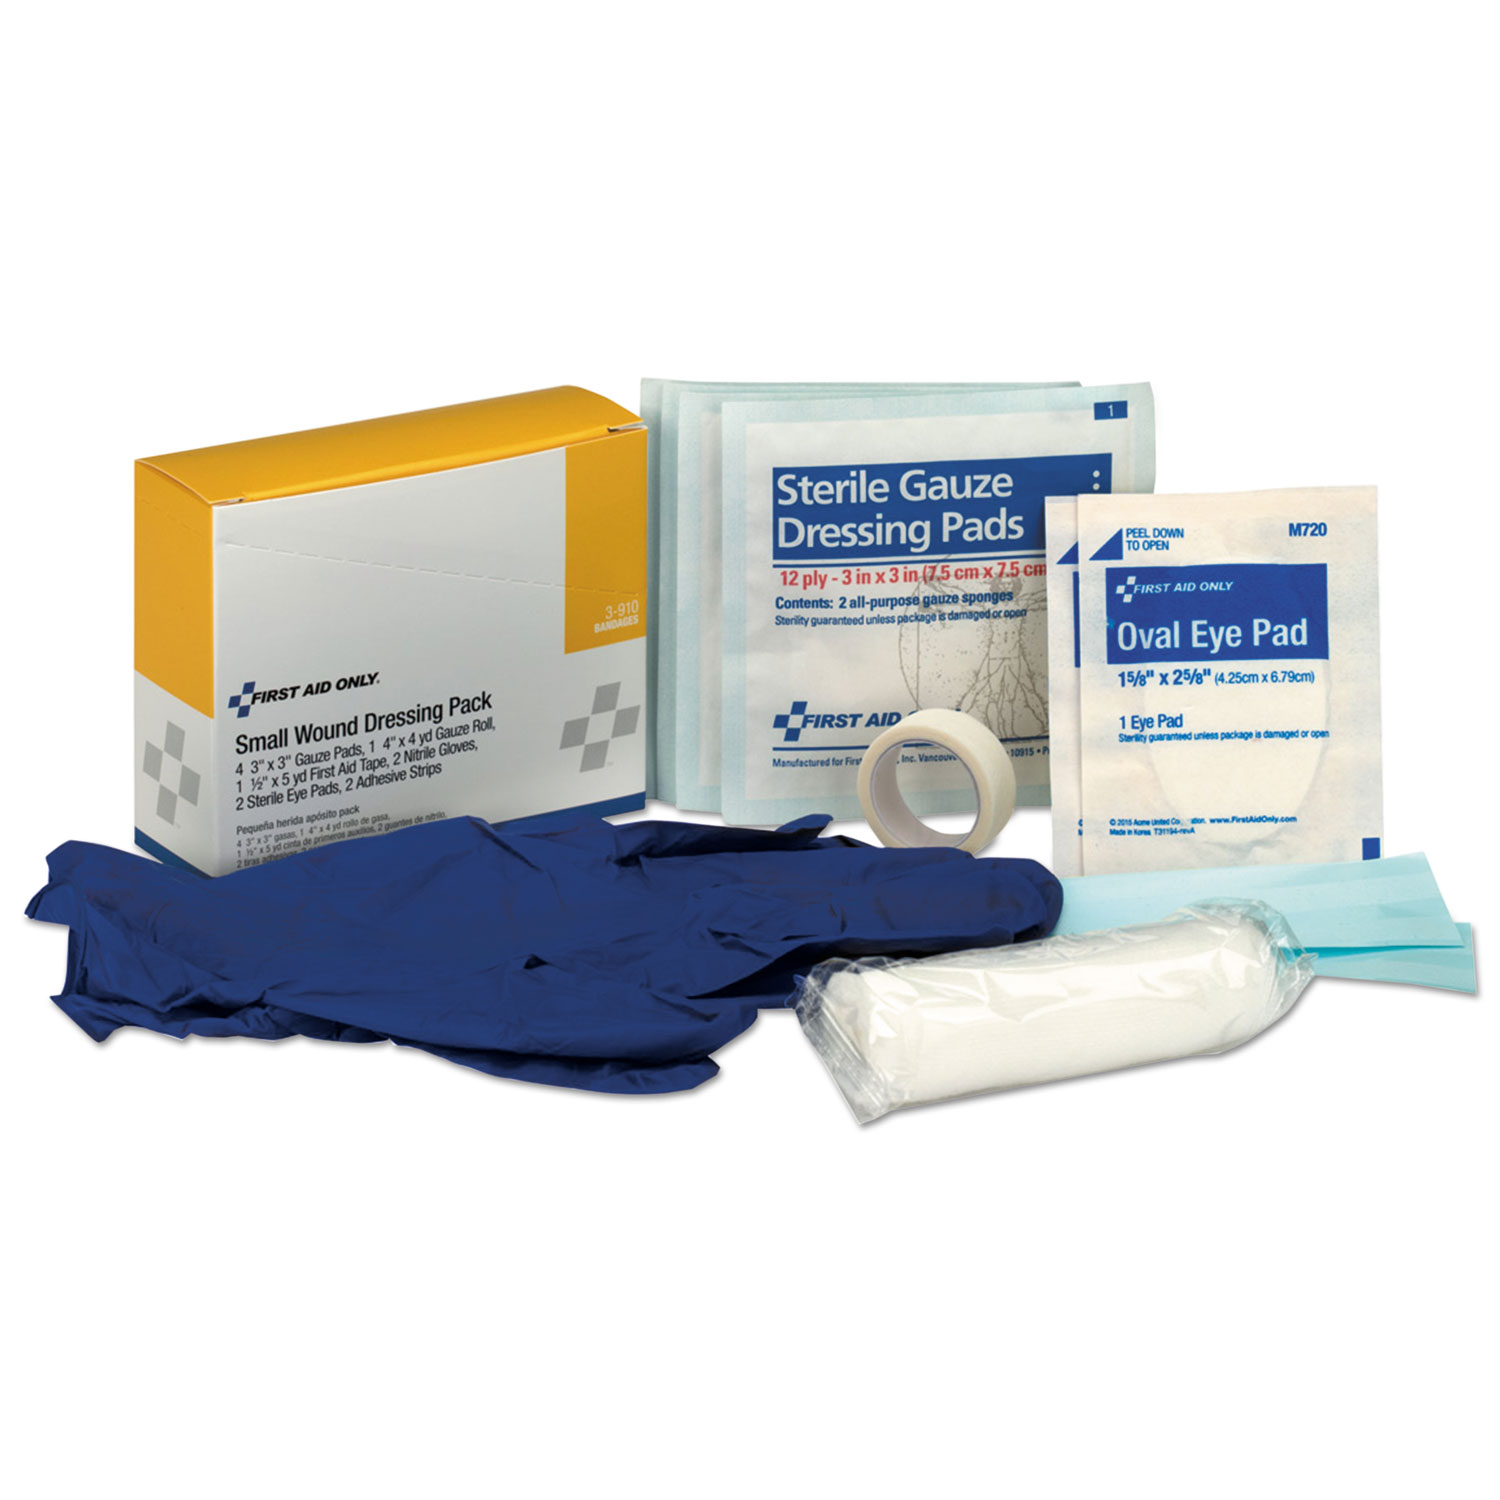  First Aid Only 3-910 Small Wound Dressing Kit, Includes Gauze, Tape, Gloves, Eye Pads, Bandages (FAO3910) 